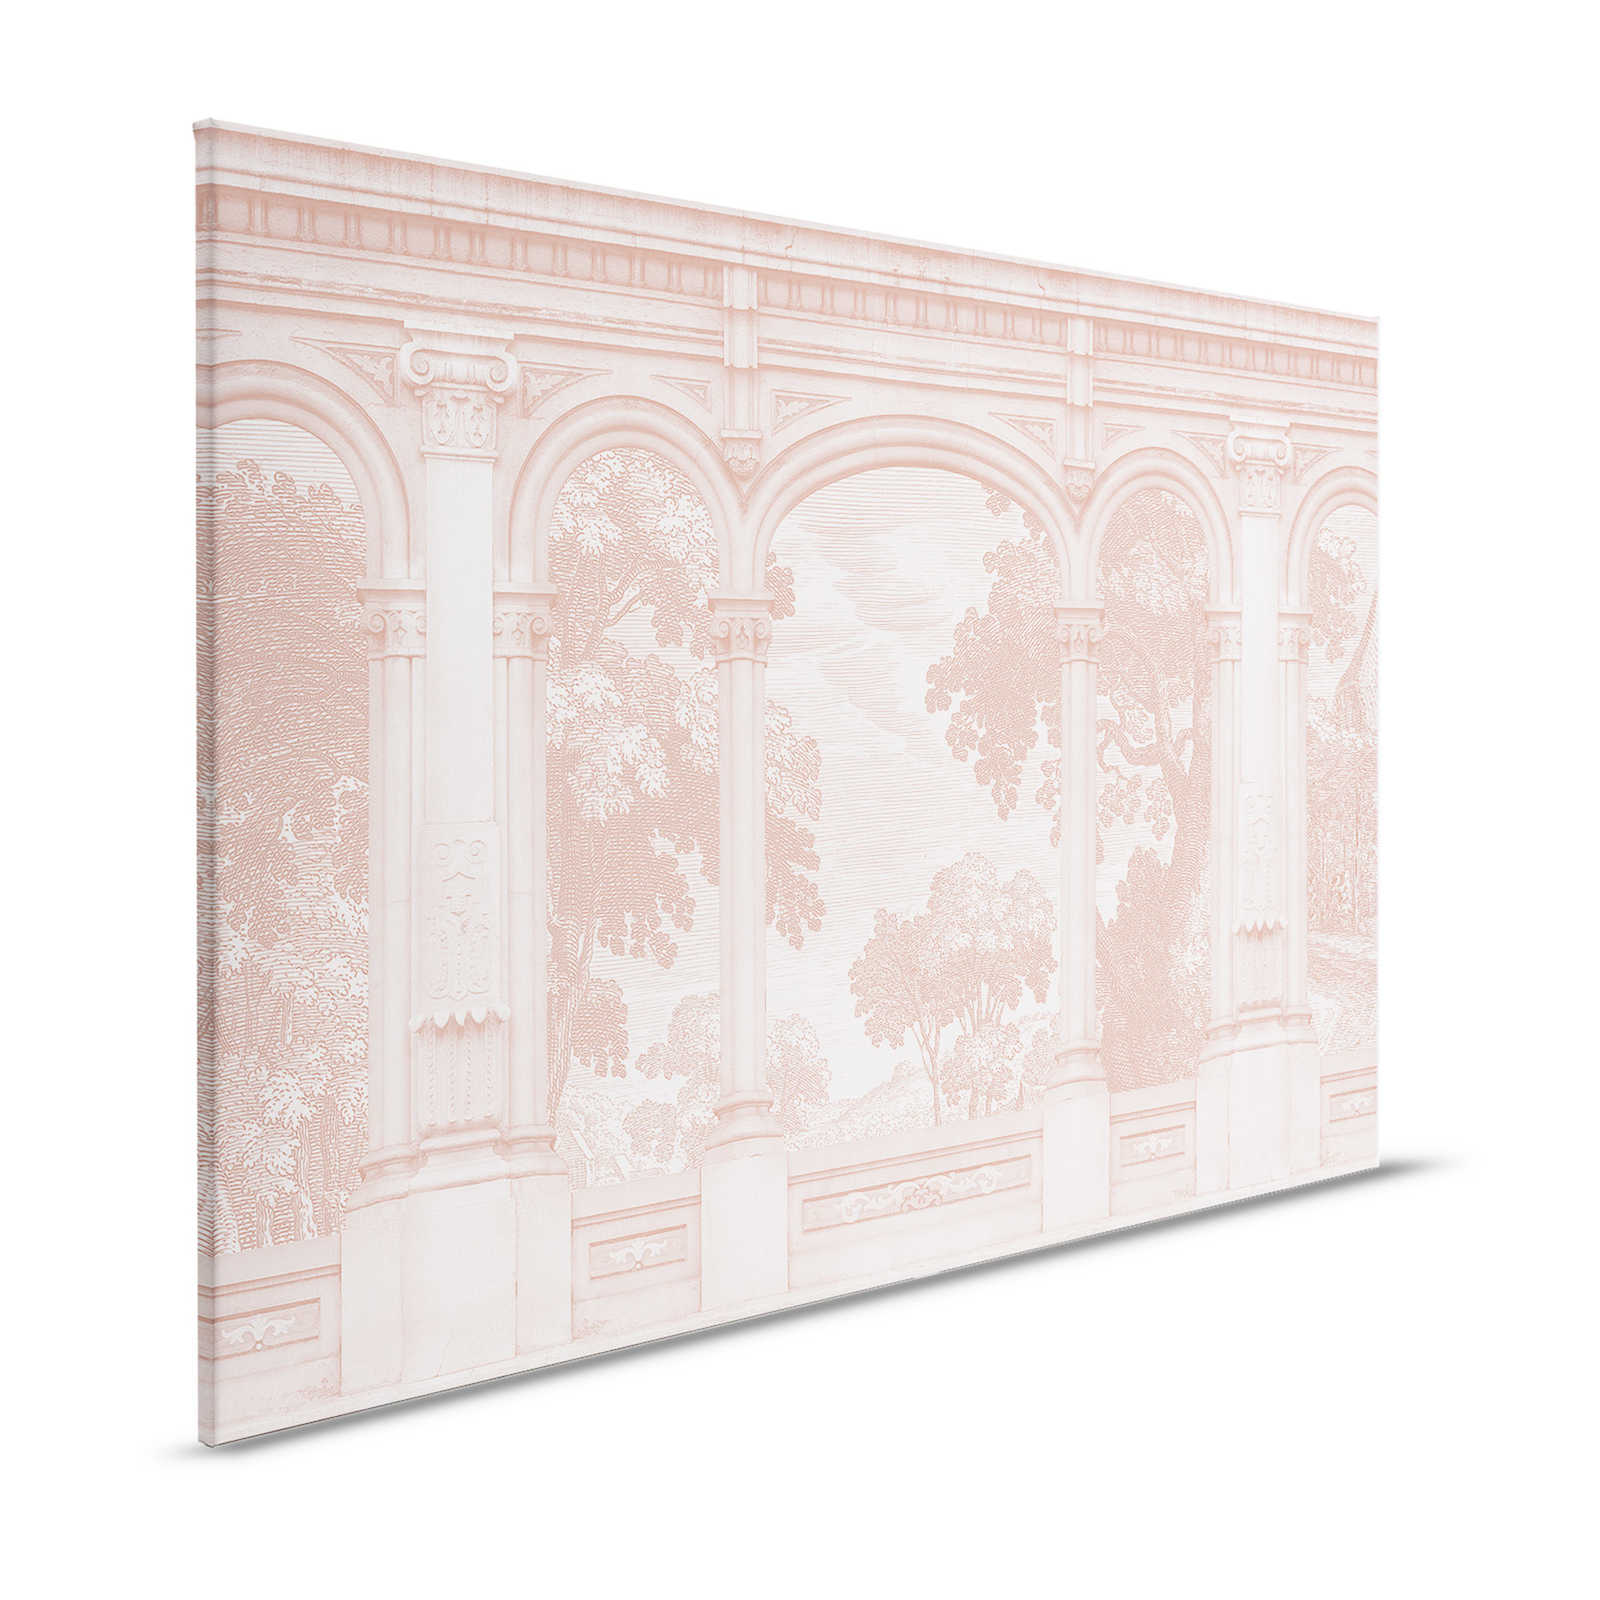 Roma 3 - Pink Canvas Painting Historic Design with Round Arch Window - 1.20 m x 0.80 m
